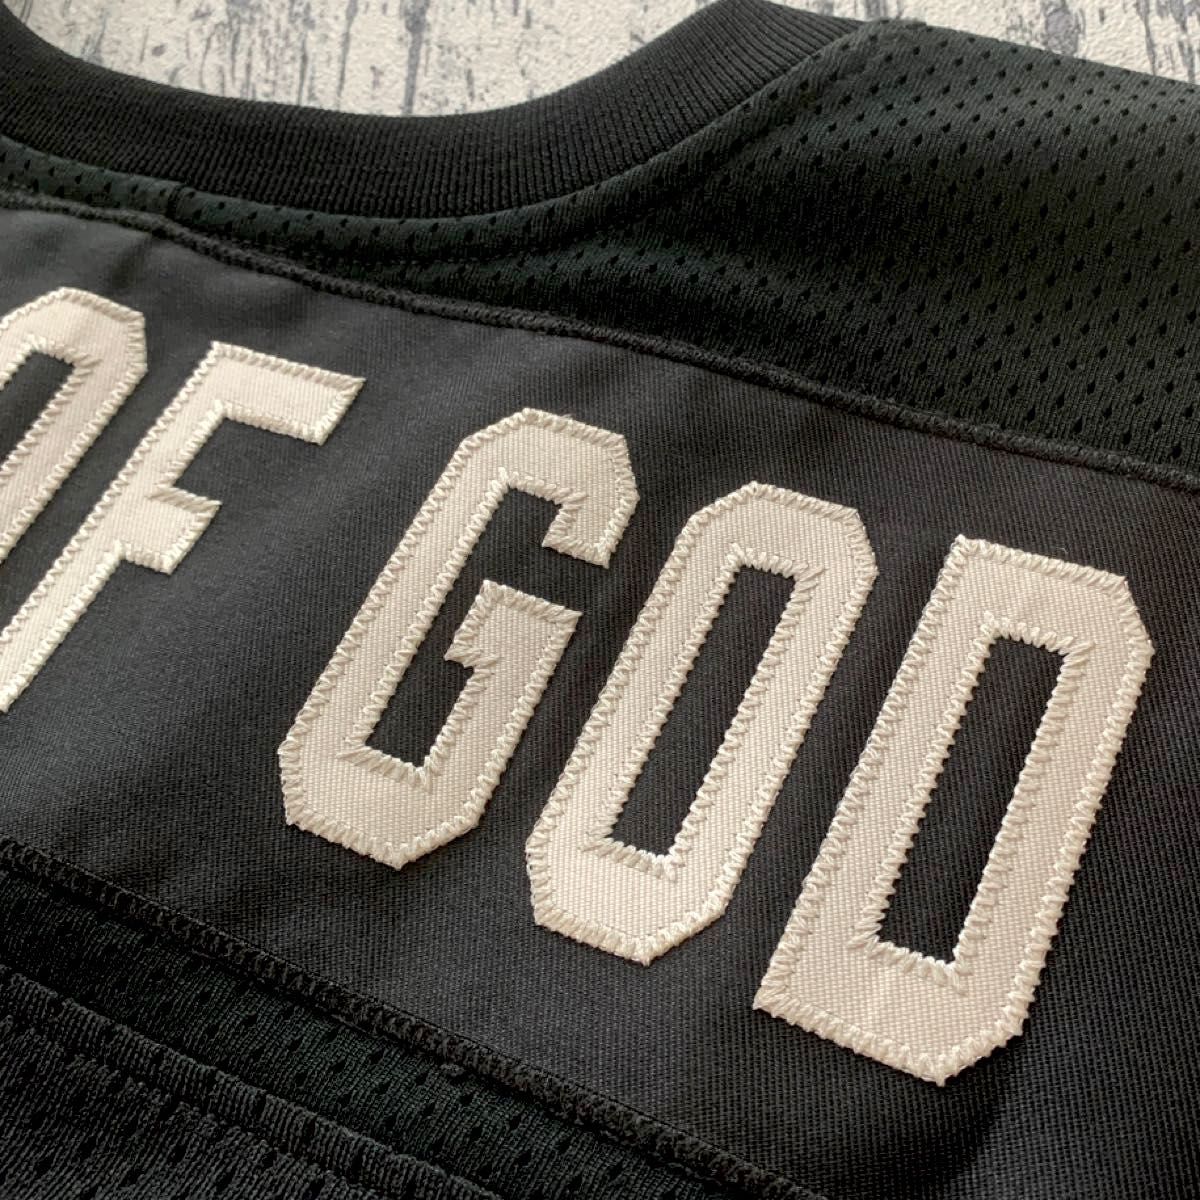 FEAR OF GOD　mesh football jersey　FIFTH COLLECTION 2017AW　S-M